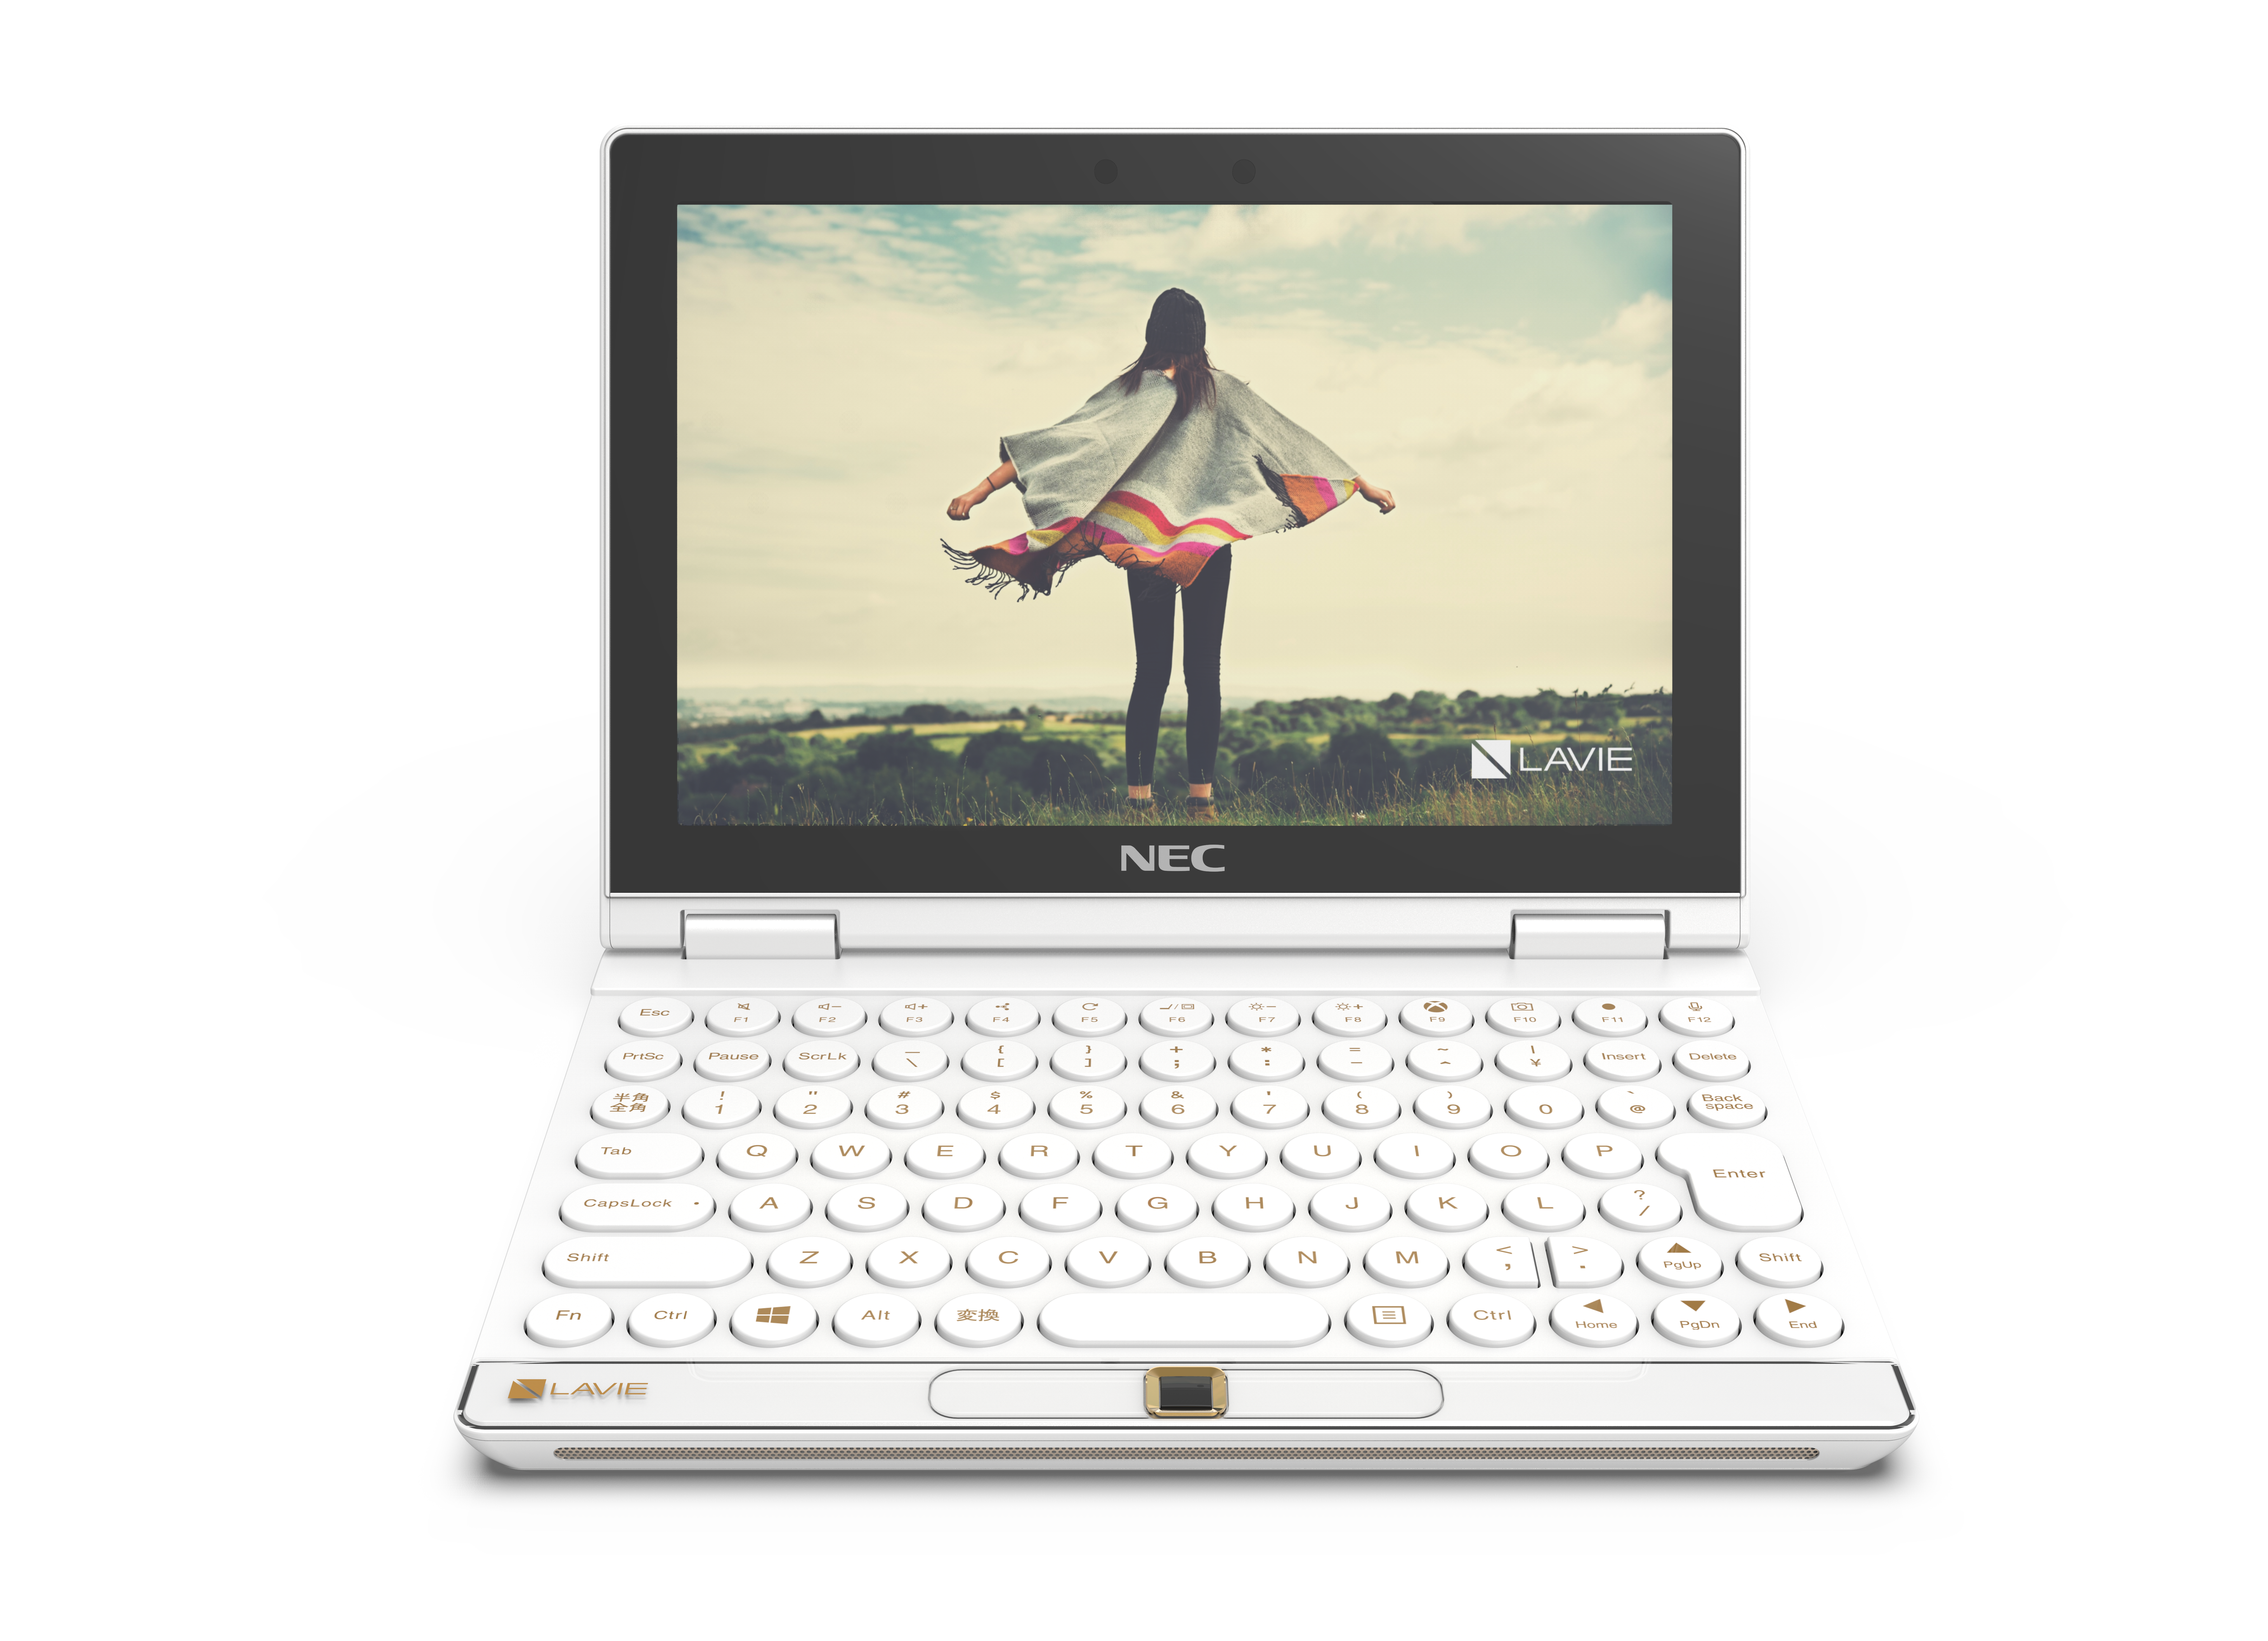 Lenovo and NEC present compact Tiger Lake devices – the Lavie Mini 8-inch handheld computer and the Lavie Pro Mobile 13-inch ultrabook